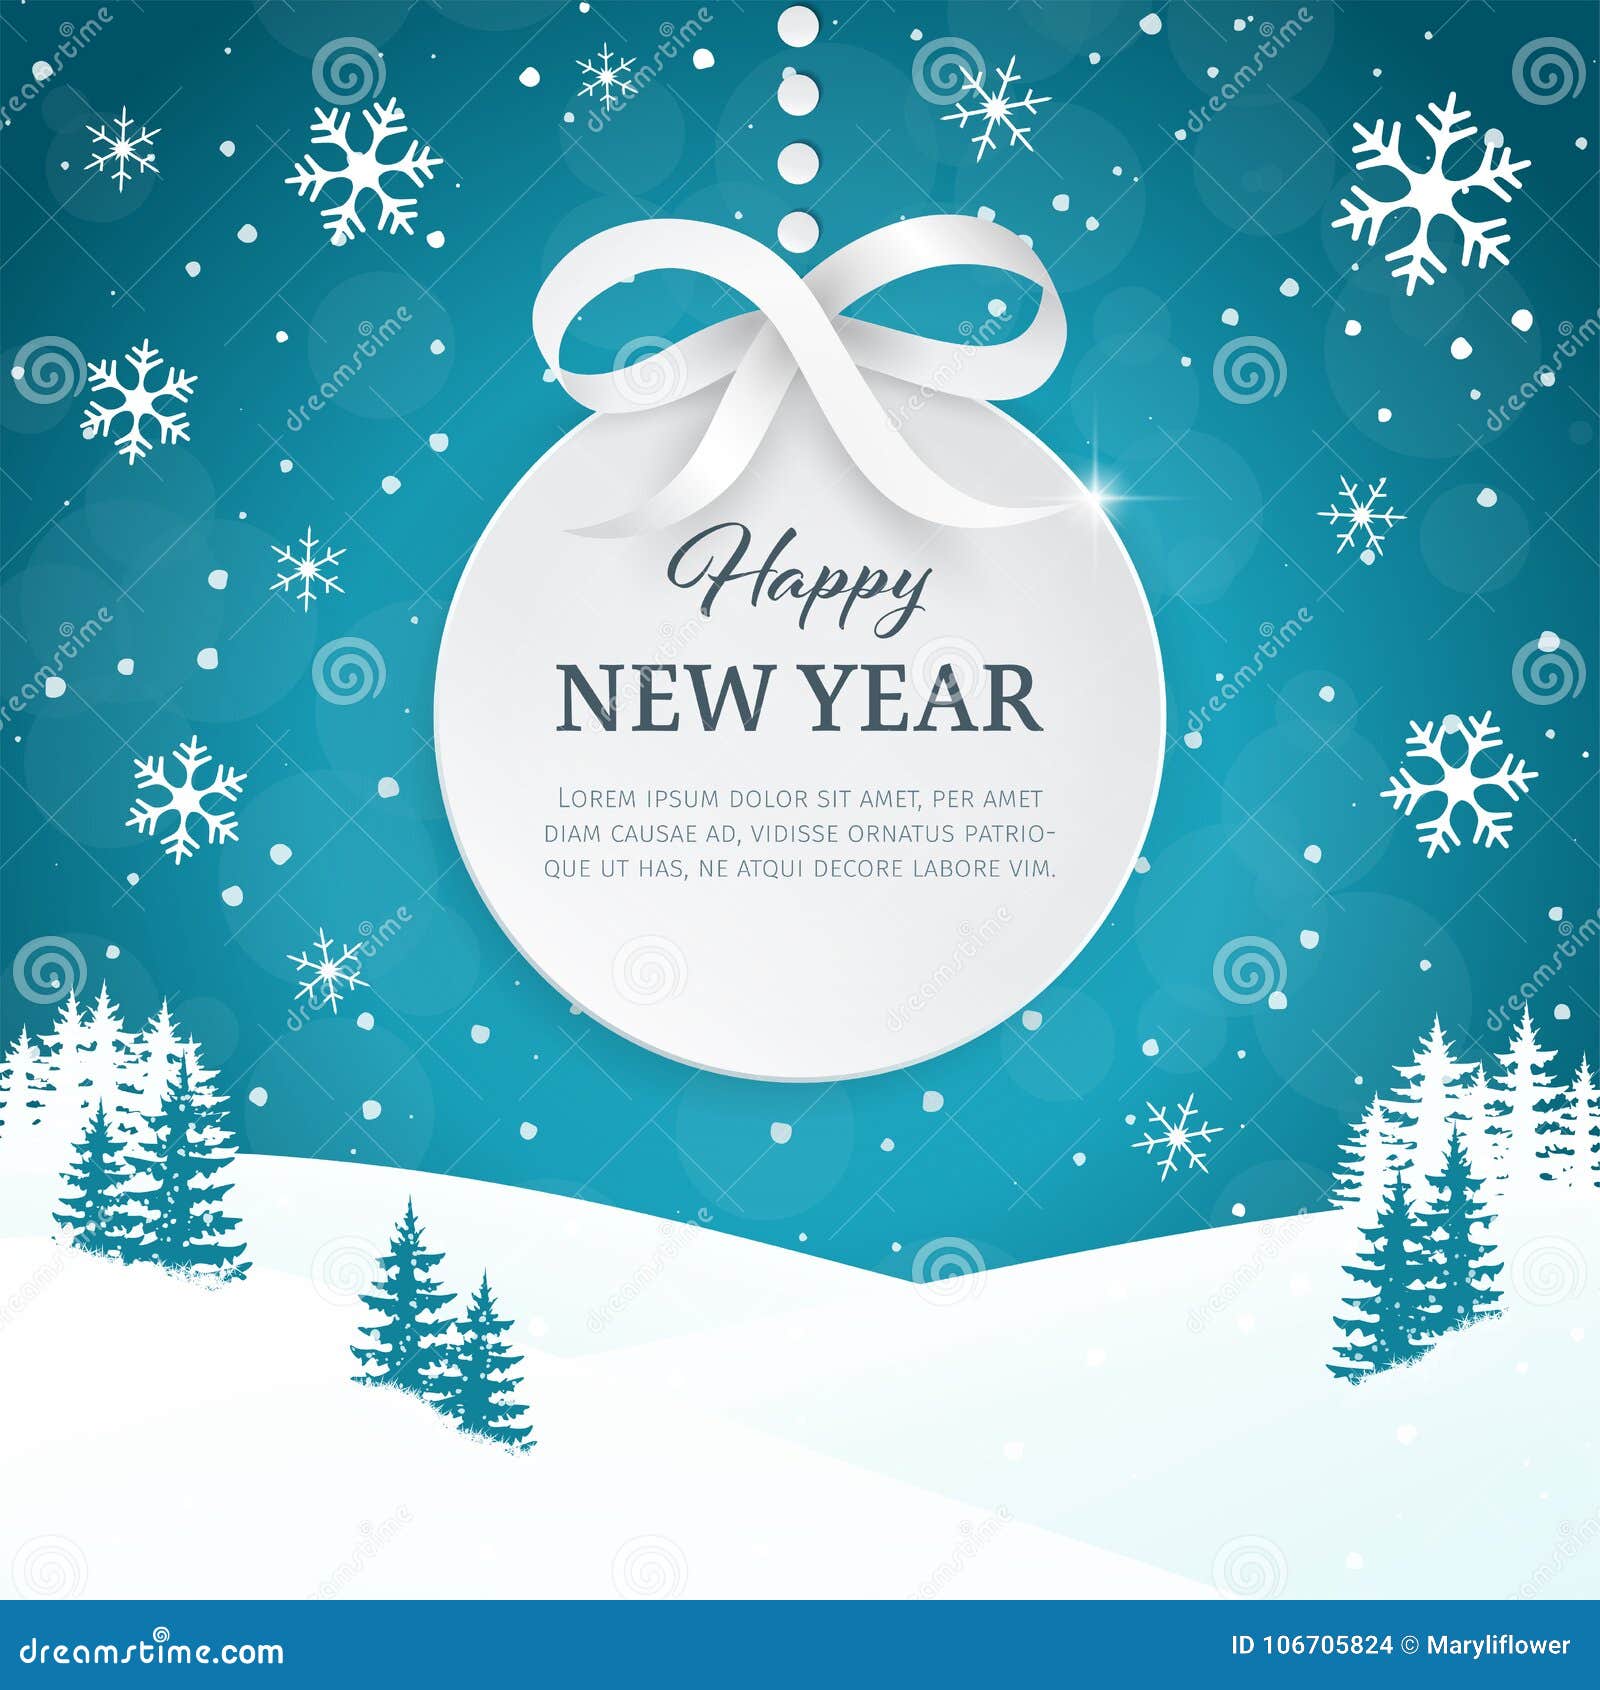 2018 Christmas and Happy New Year Greeting Card Background with Snowflakes.  Winter Scene Landscape Background with Falling Snow Stock Vector -  Illustration of scenery, christmas: 106705824